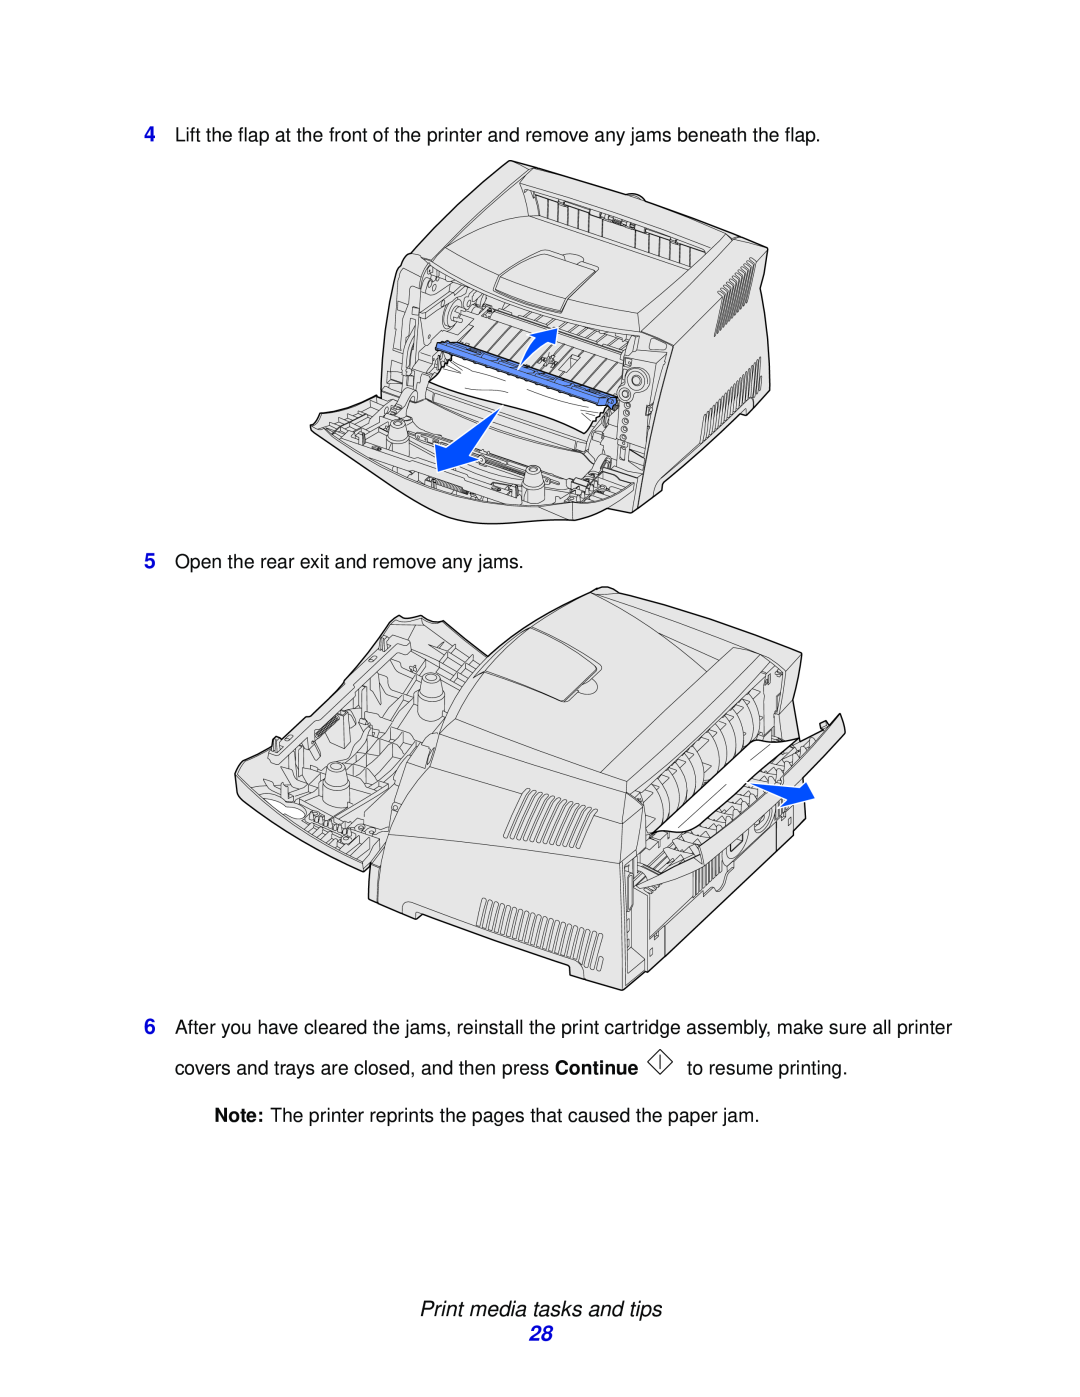 Lexmark E332n, 232, 230 manual Print media tasks and tips, Open the rear exit and remove any jams 